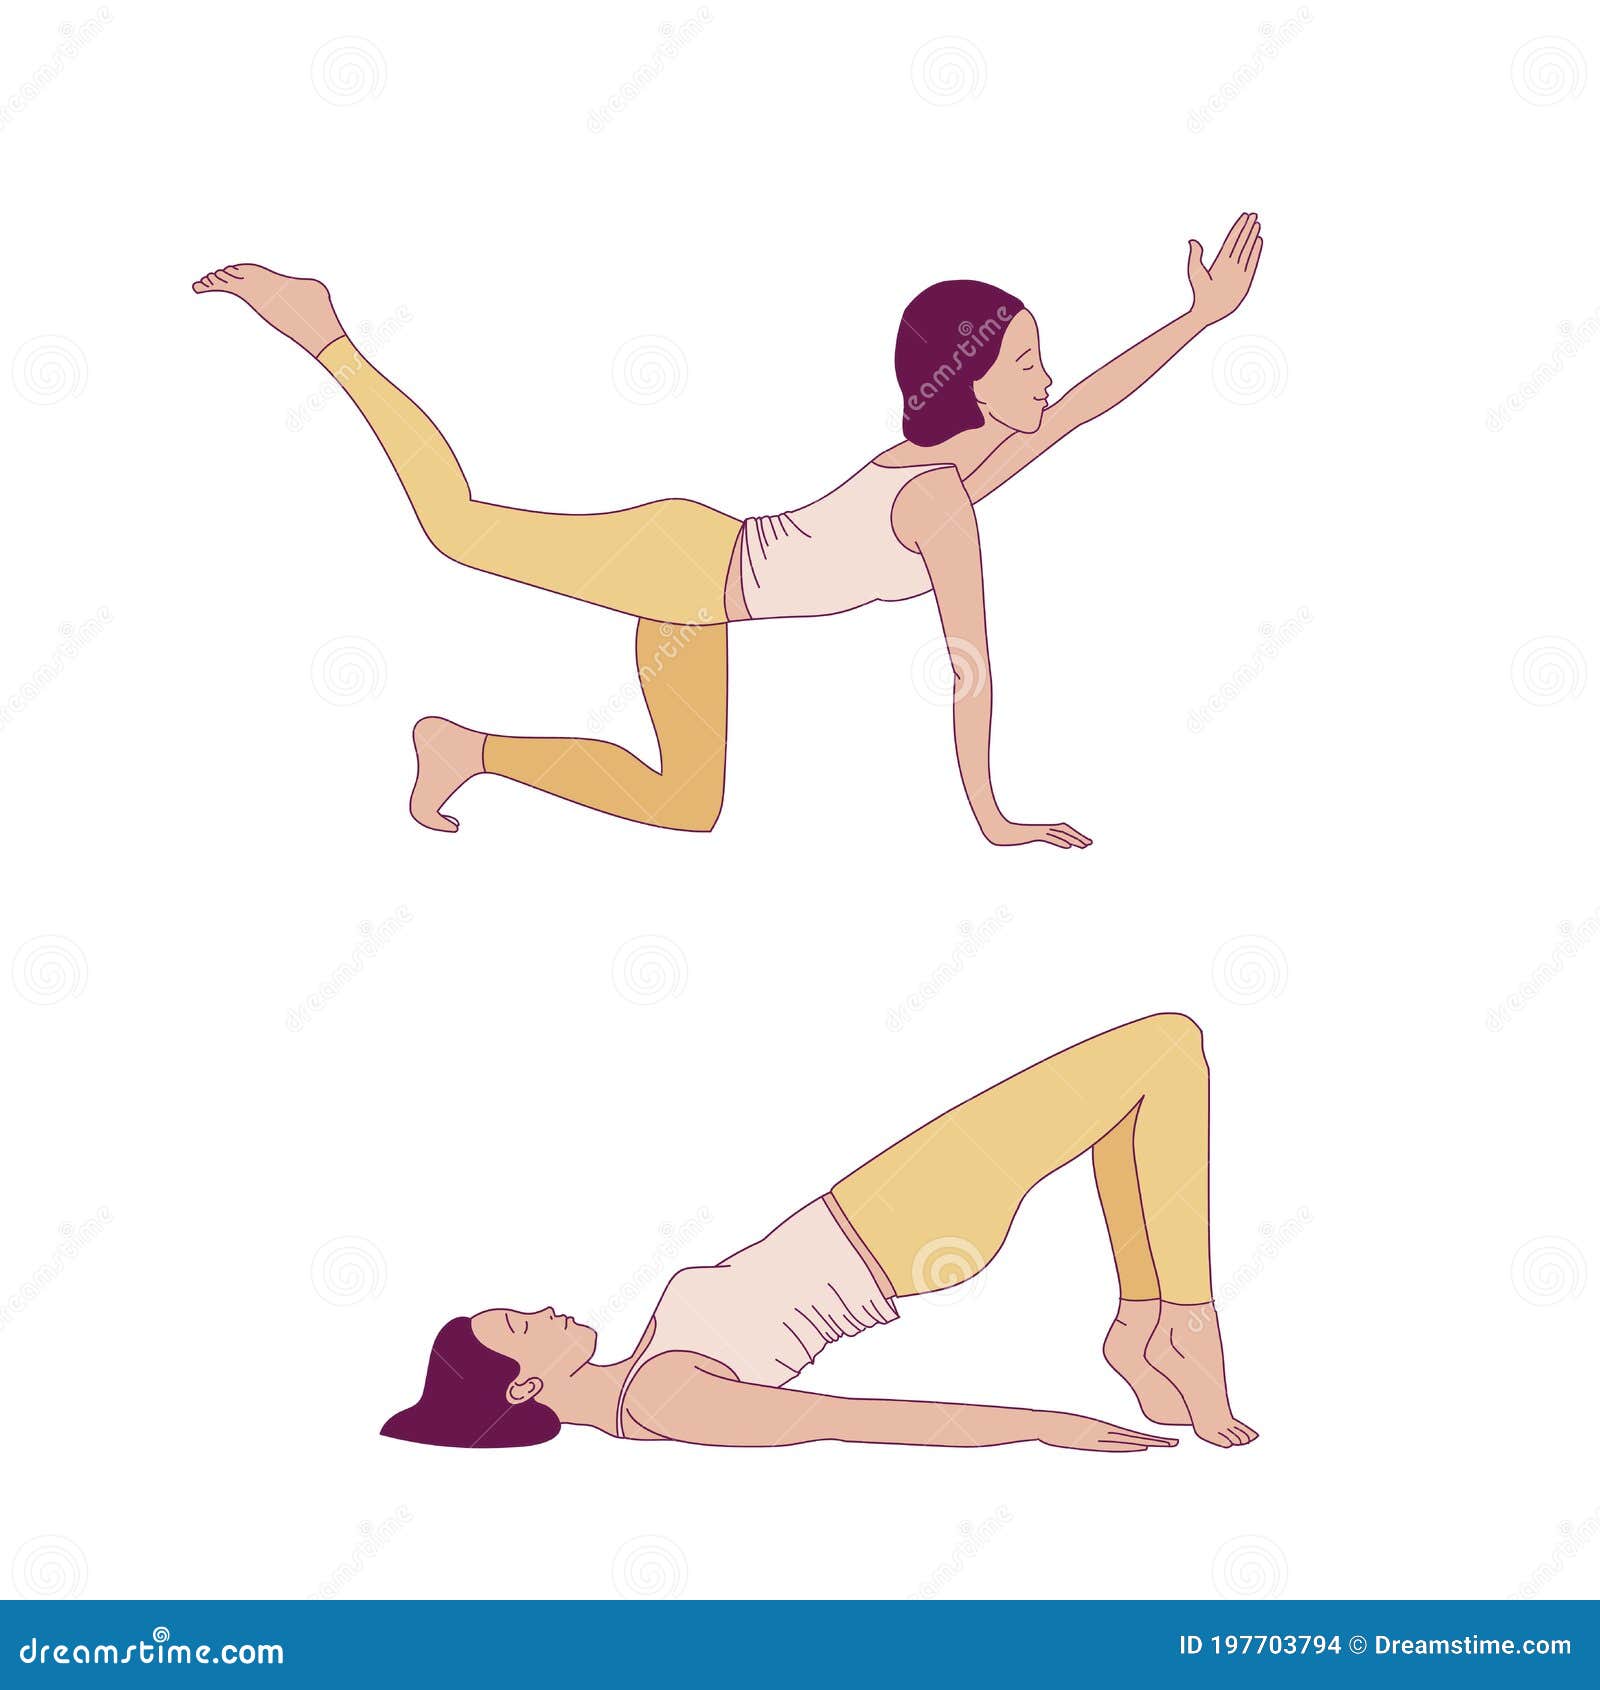 exercises to strengthen the muscles of the vagina and pelvic floor muscles.